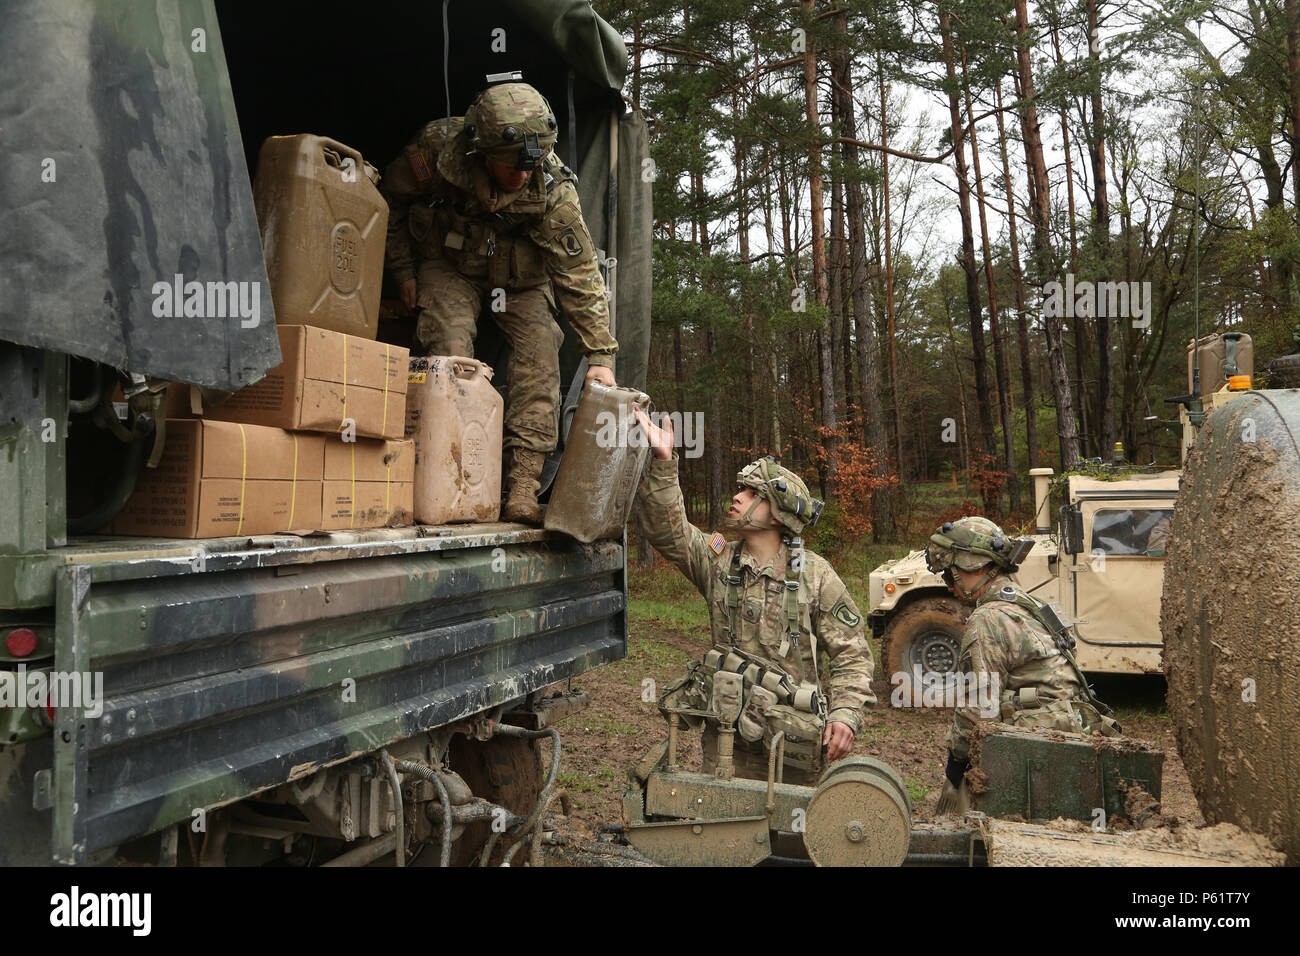 U.S. Soldiers of Delta Troop, 1st Squadron, 91st Cavalry Regiment, 173rd Airborne Brigade unload supplies while conducting a logistical resupply mission during exercise Saber Junction 16 at the U.S. Army’s Joint Multinational Readiness Center (JMRC) in Hohenfels, Germany, April 17, 2016. Saber Junction 16 is the U.S. Army Europe’s 173rd Airborne Brigade’s combat training center certification exercise, taking place at the JMRC in Hohenfels, Germany, Mar. 31-Apr. 24, 2016.  The exercise is designed to evaluate the readiness of the Army’s Europe-based combat brigades to conduct unified land opera Stock Photo